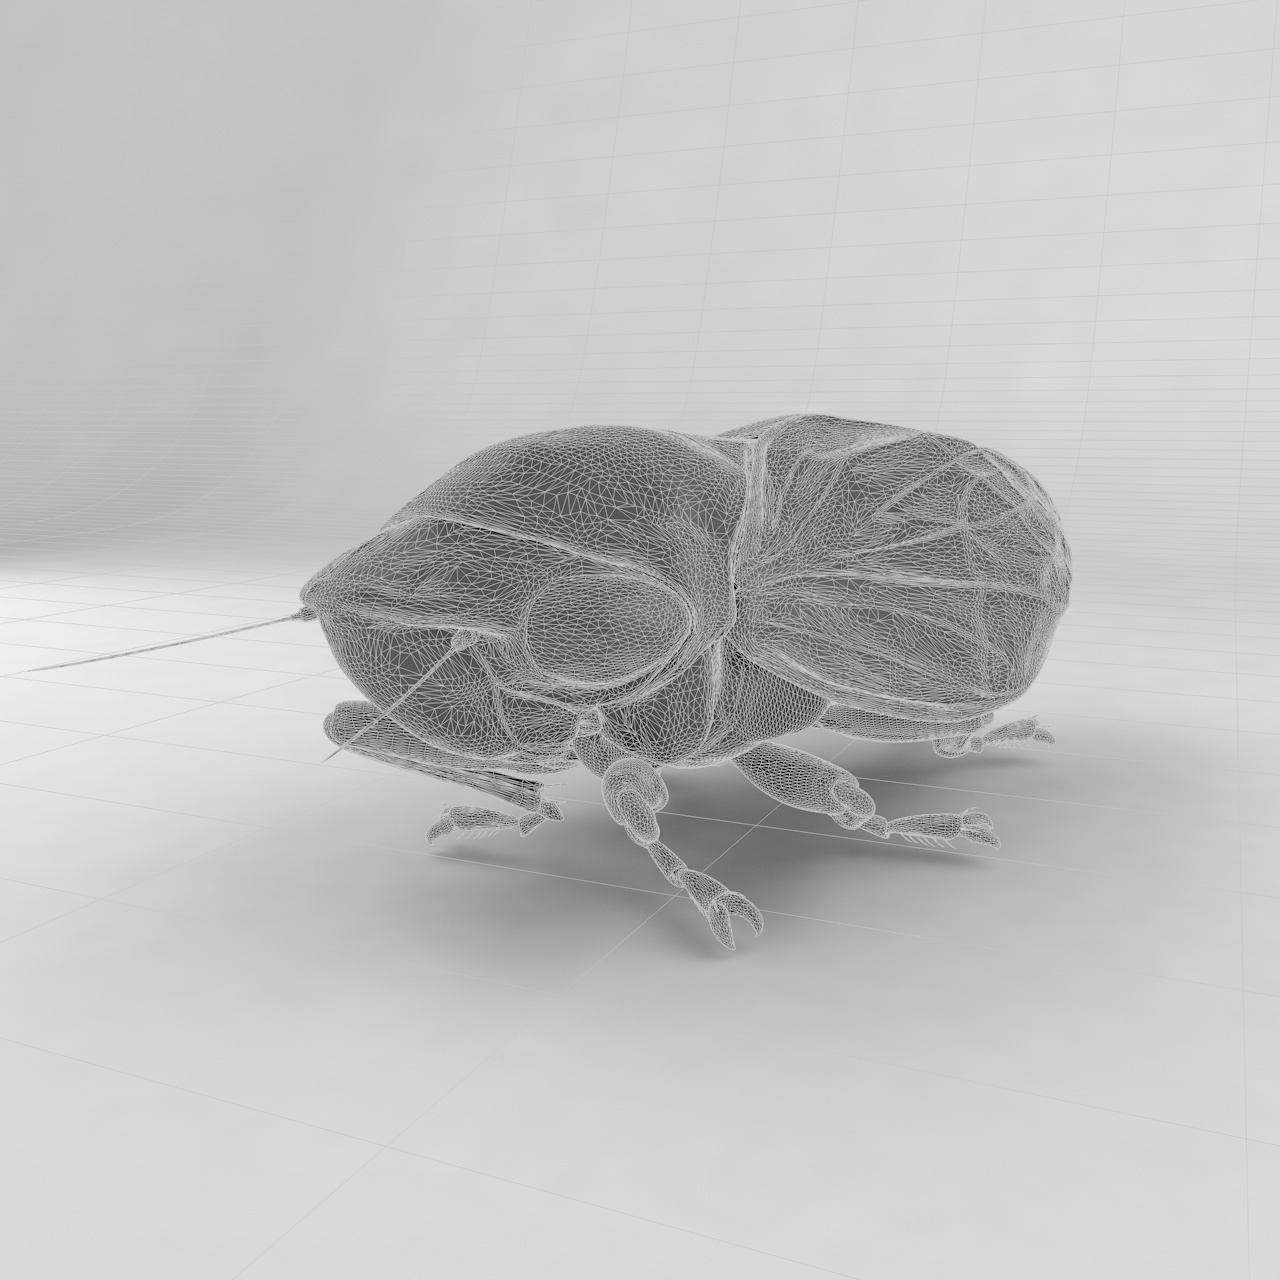 Froghopper insect beetles 3d model